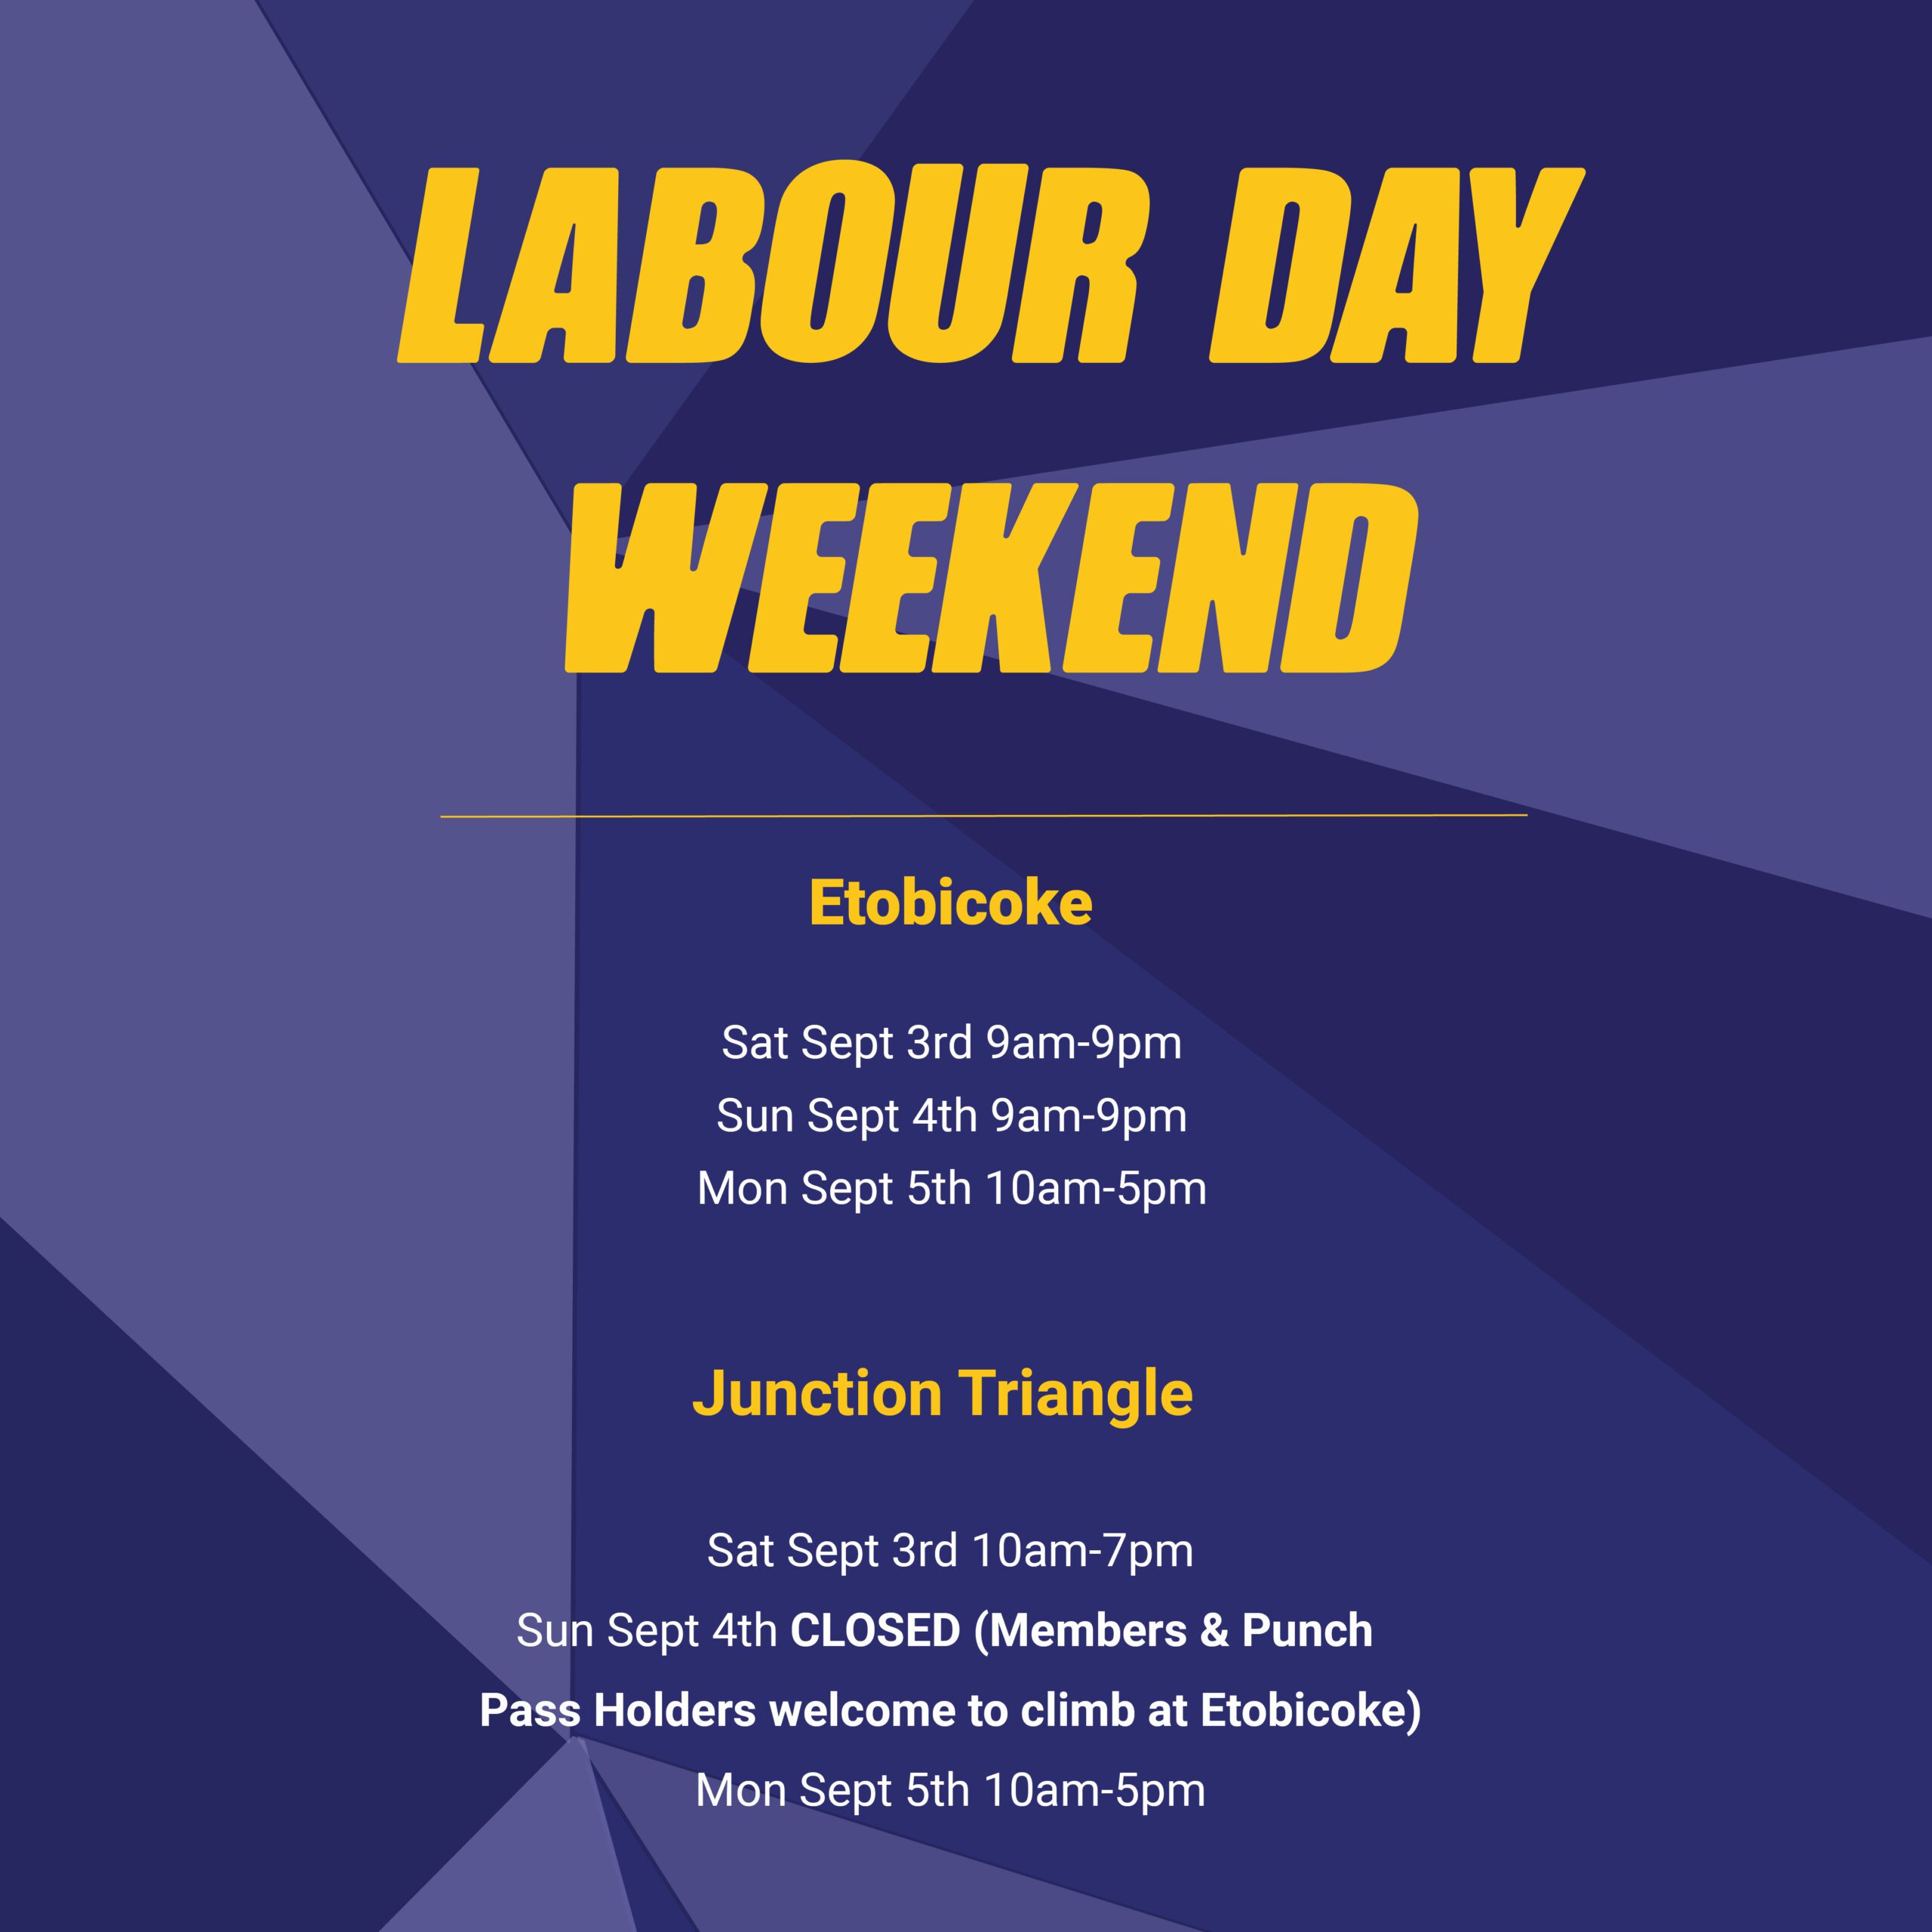 labour day weekend hours